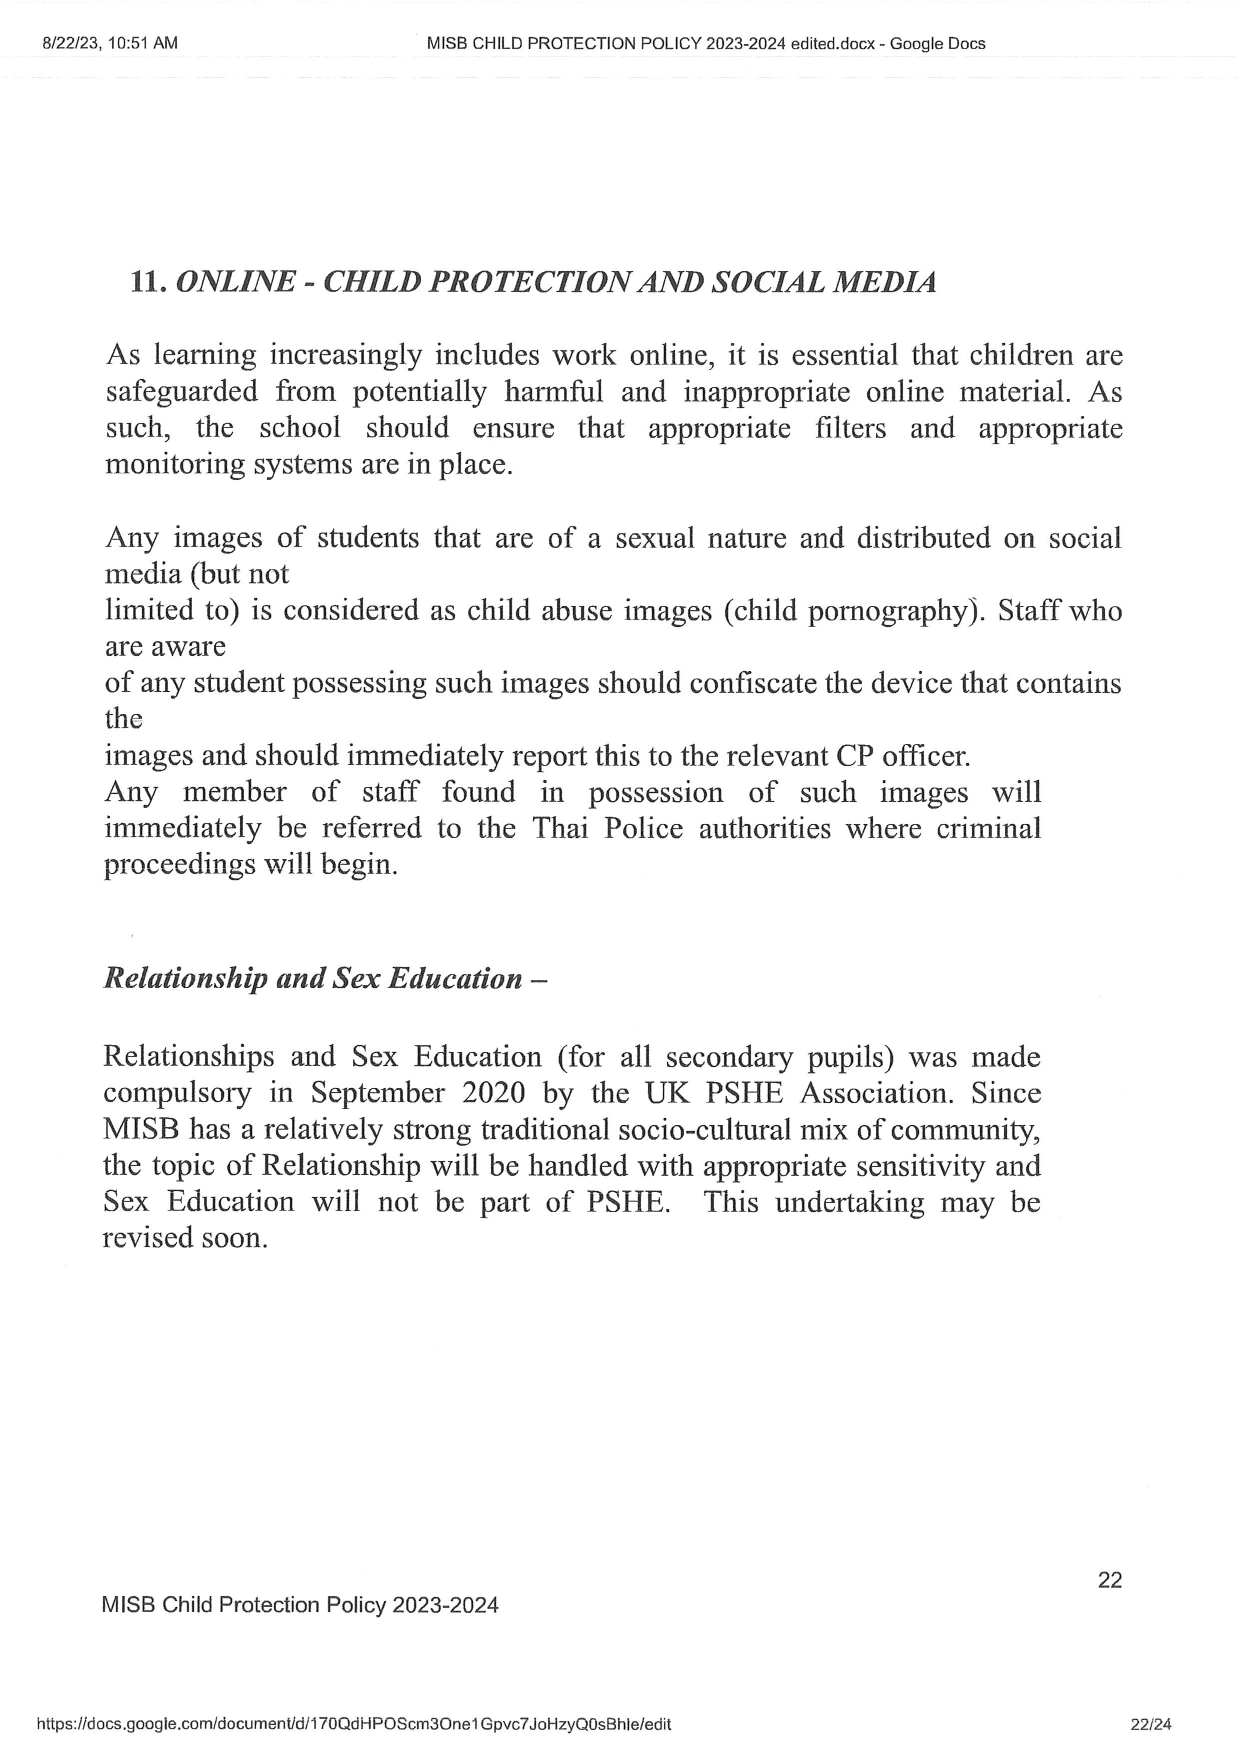 Child Protection Policy 2023 2024 page 0022